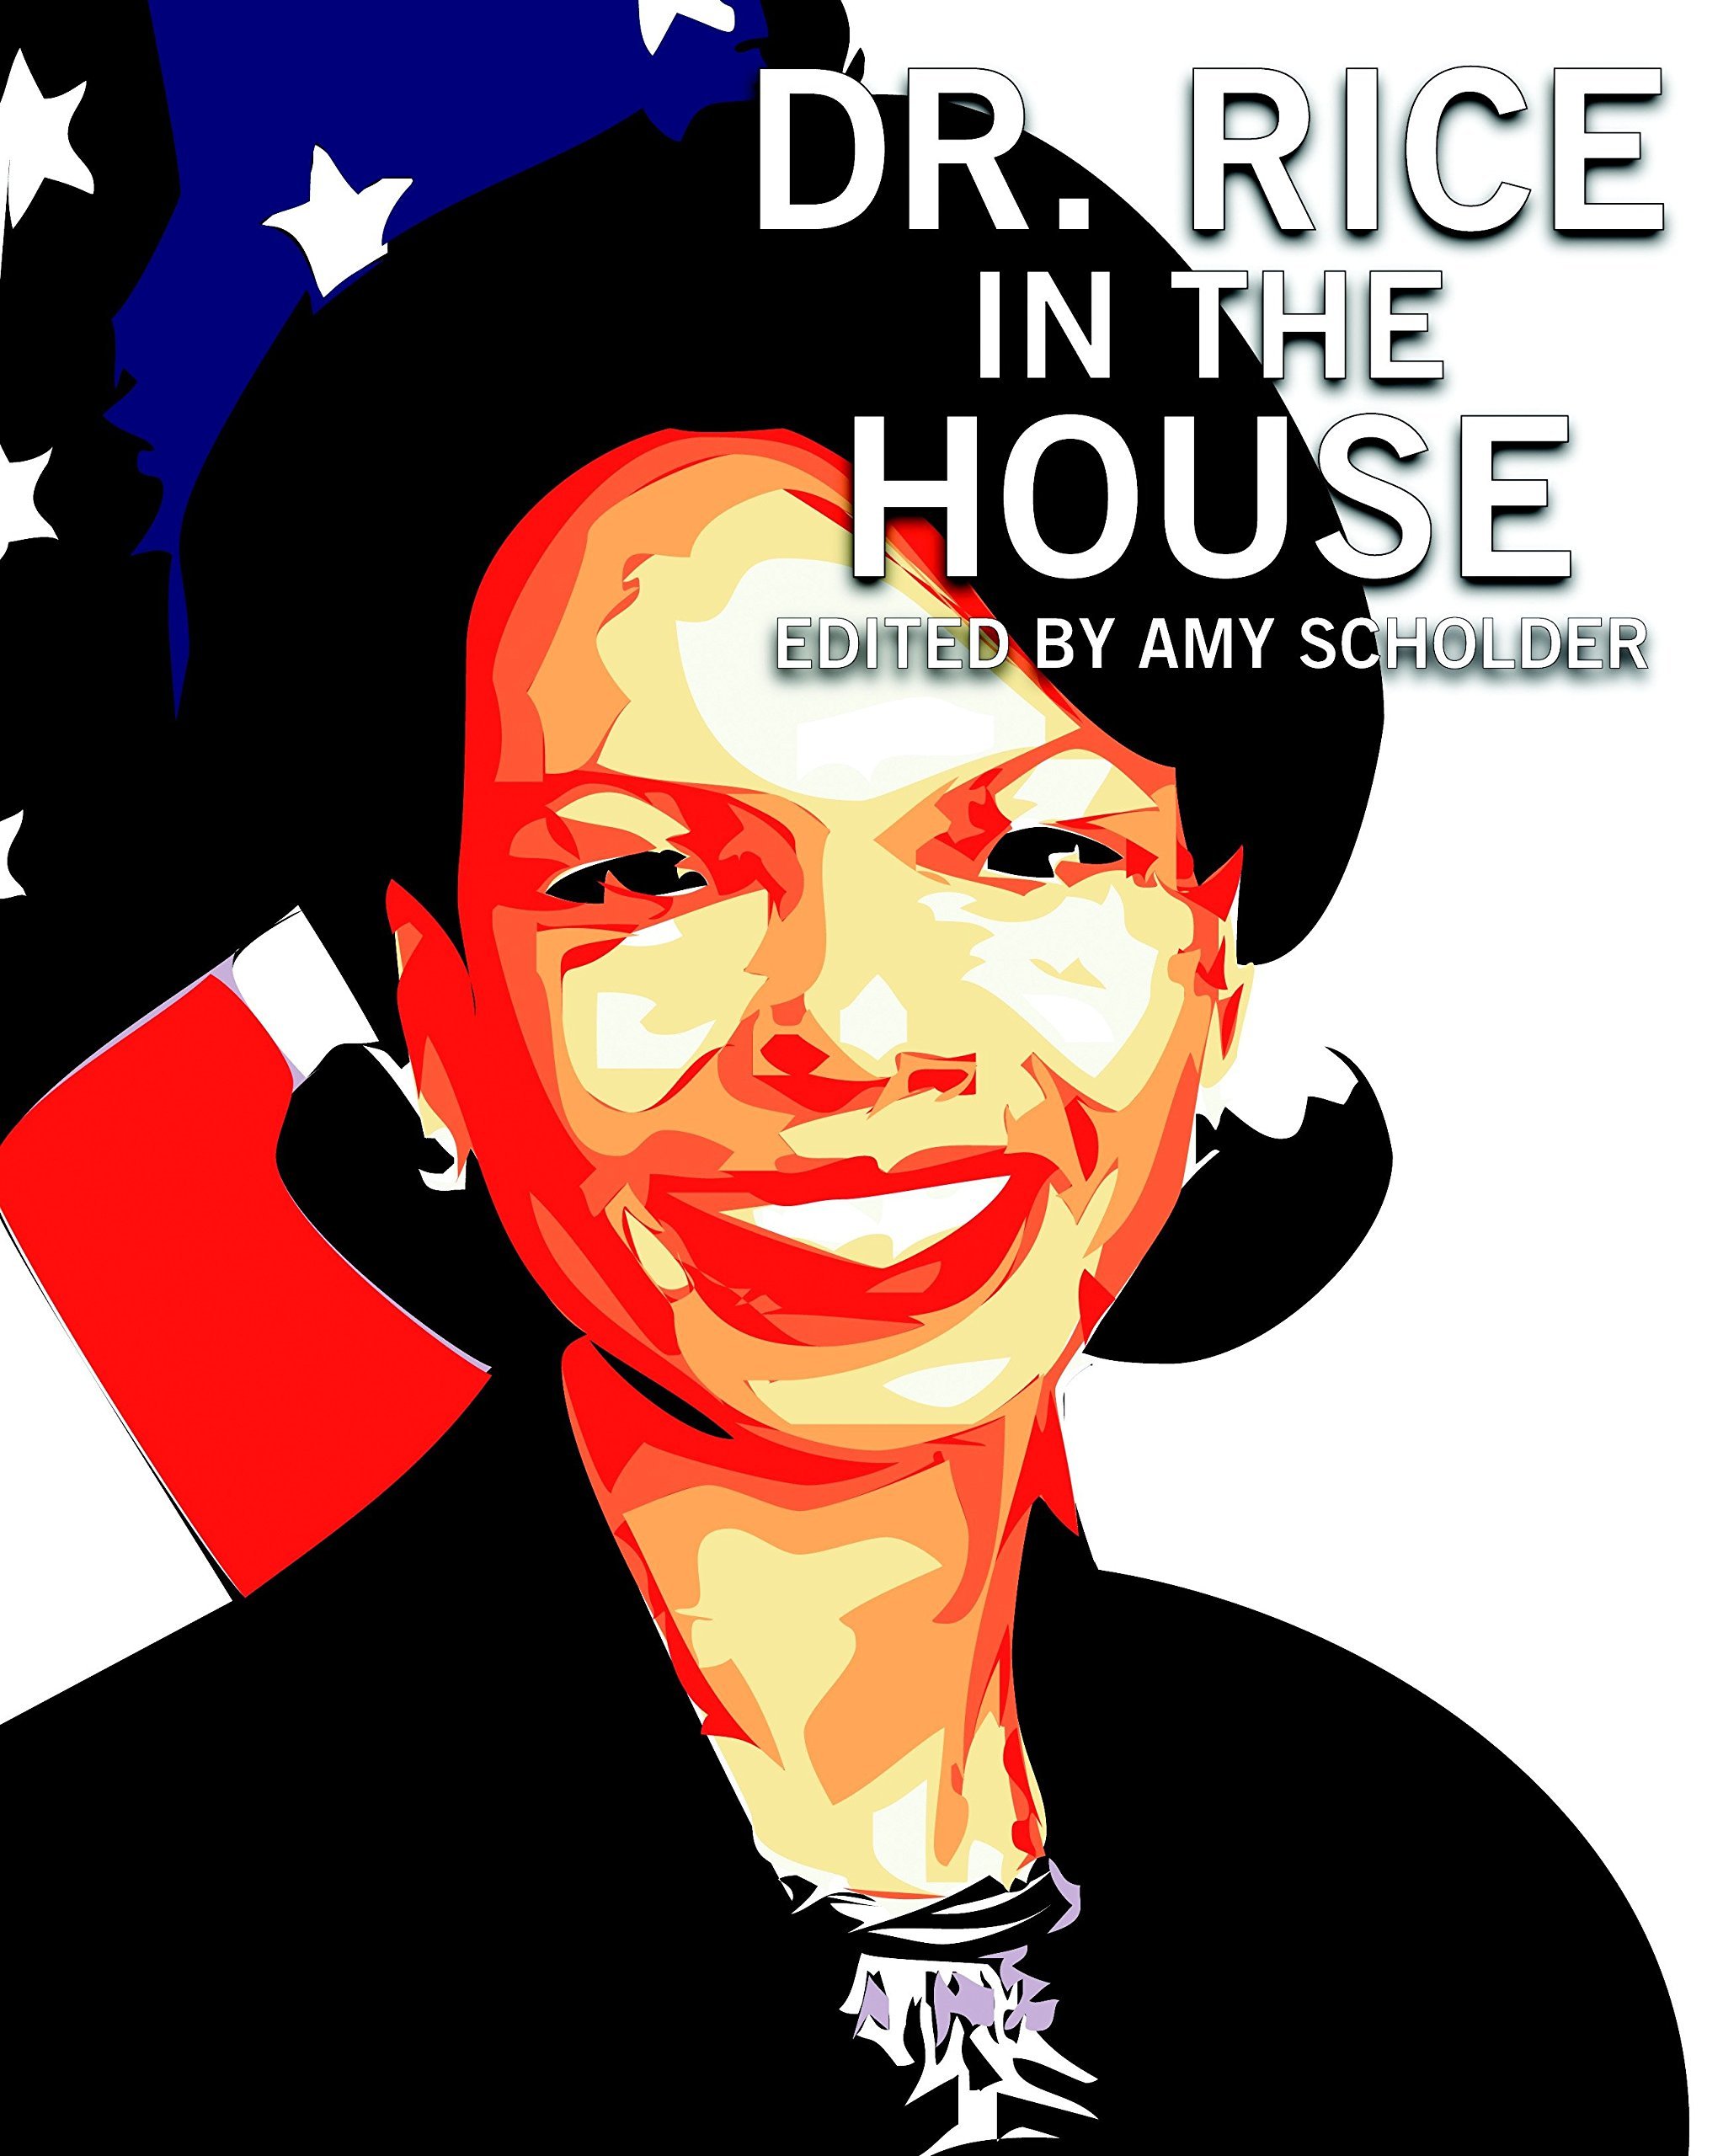 Dr-Rice-In-The-House.jpg